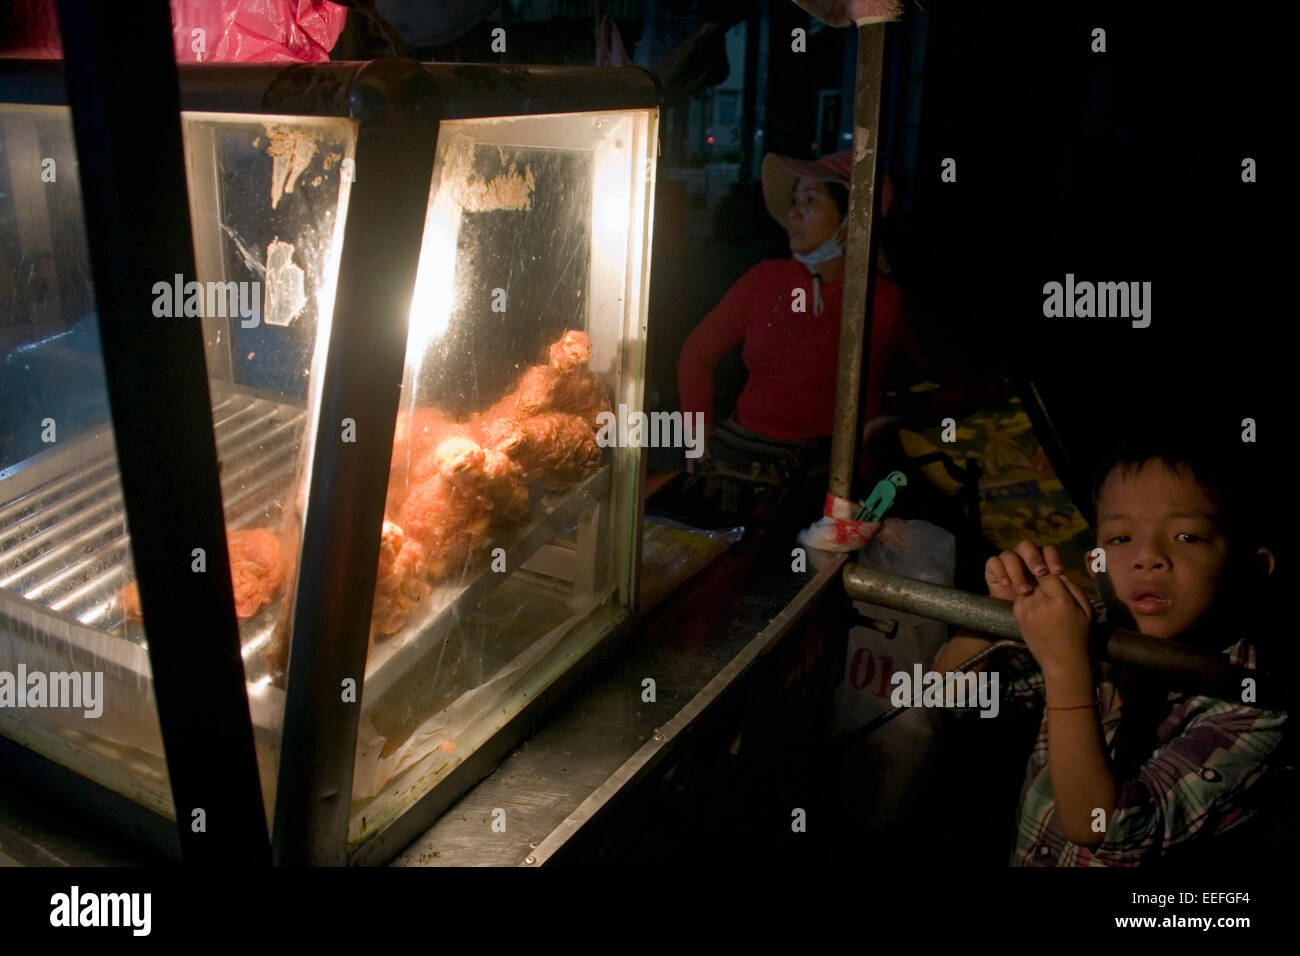 A young boy is leaning on a food cart containing fried chicken on a city street in Kampong Cham, Cambodia. Stock Photo